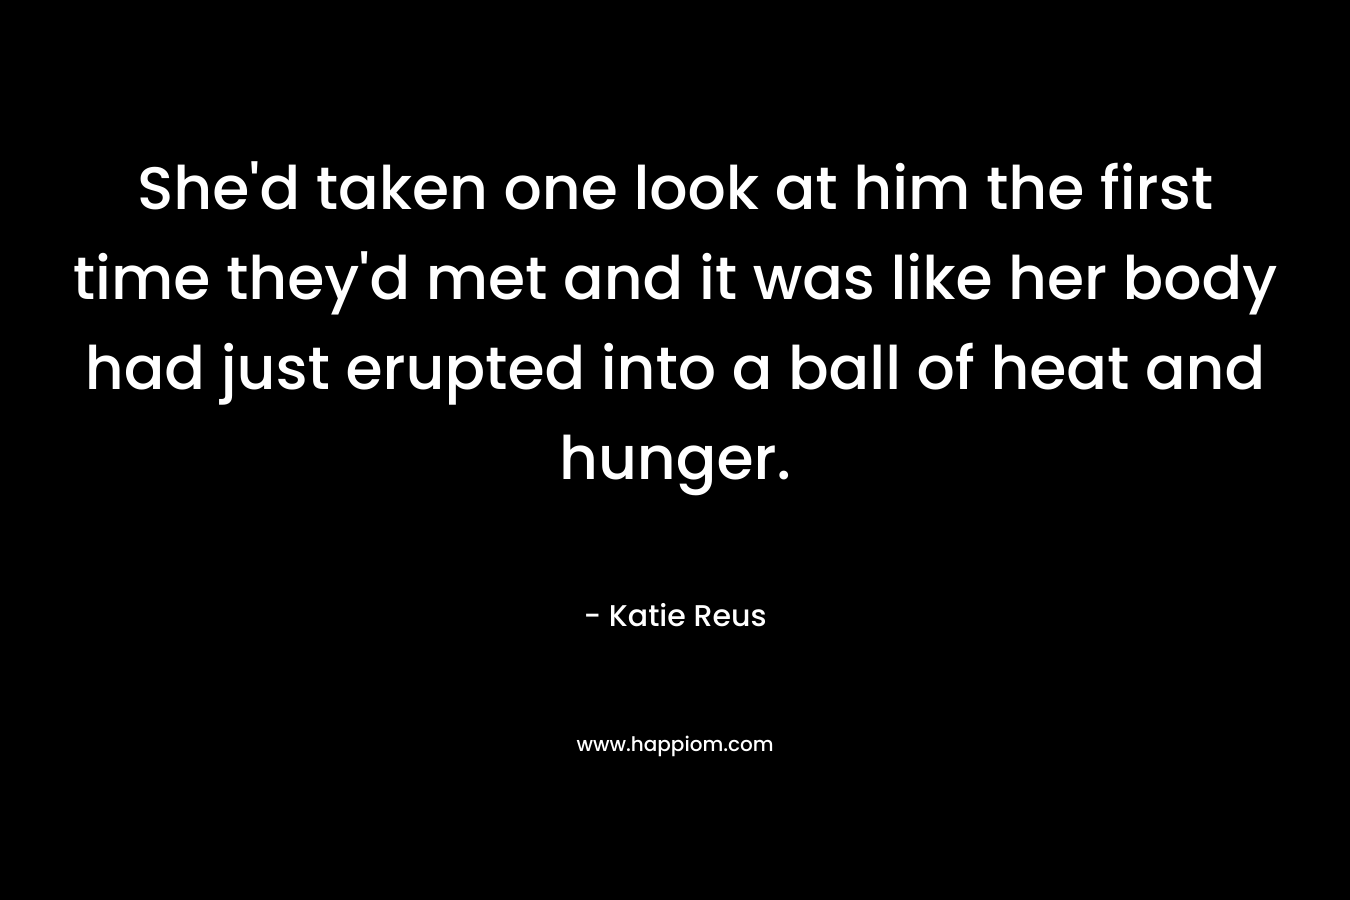 She’d taken one look at him the first time they’d met and it was like her body had just erupted into a ball of heat and hunger. – Katie Reus